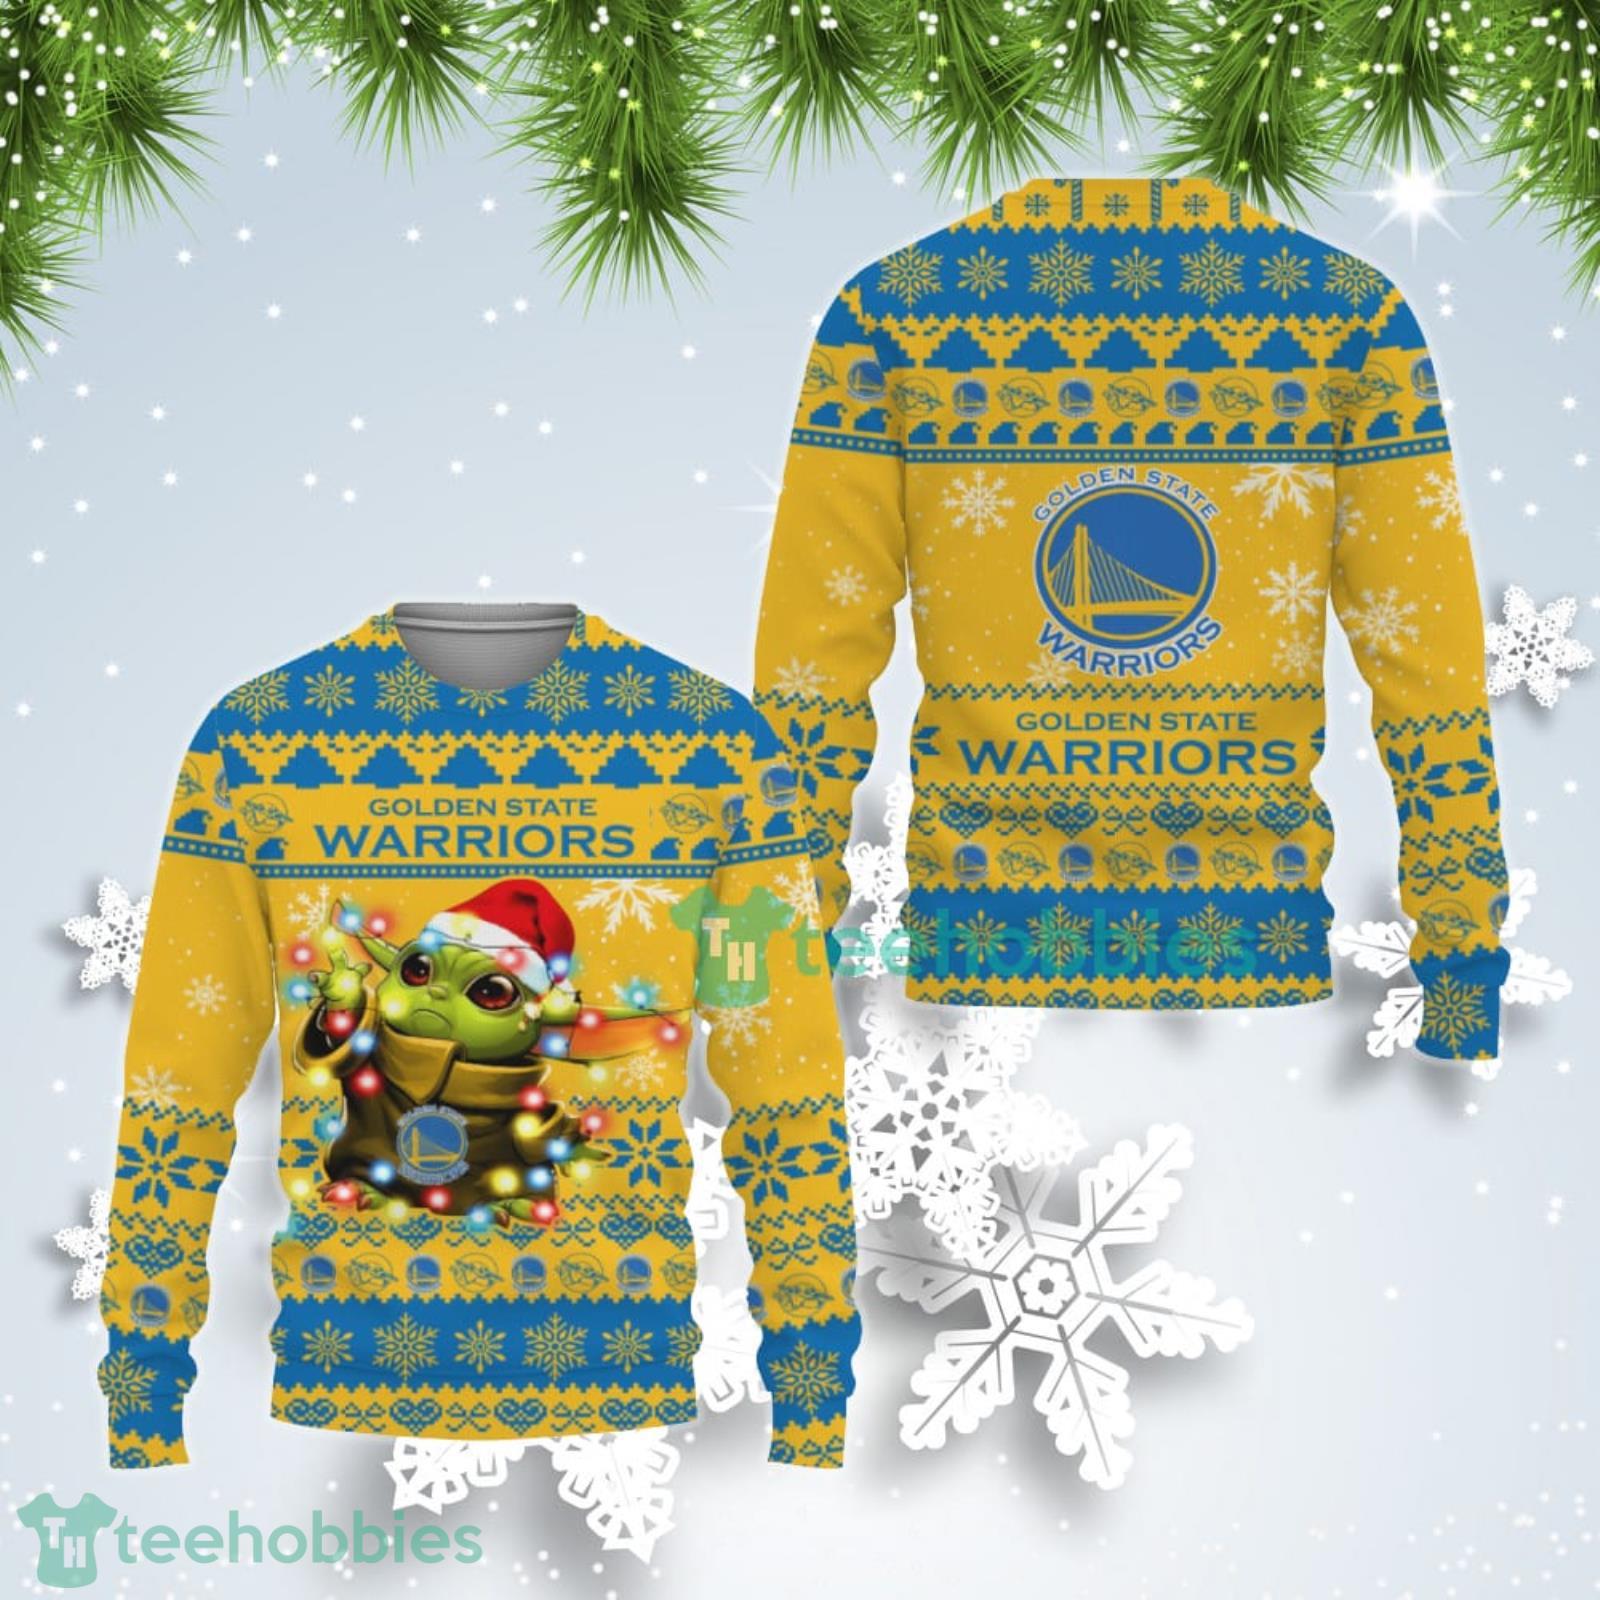 Golden State Warriors Baby Yoda Ugly Christmas Sweater Gift